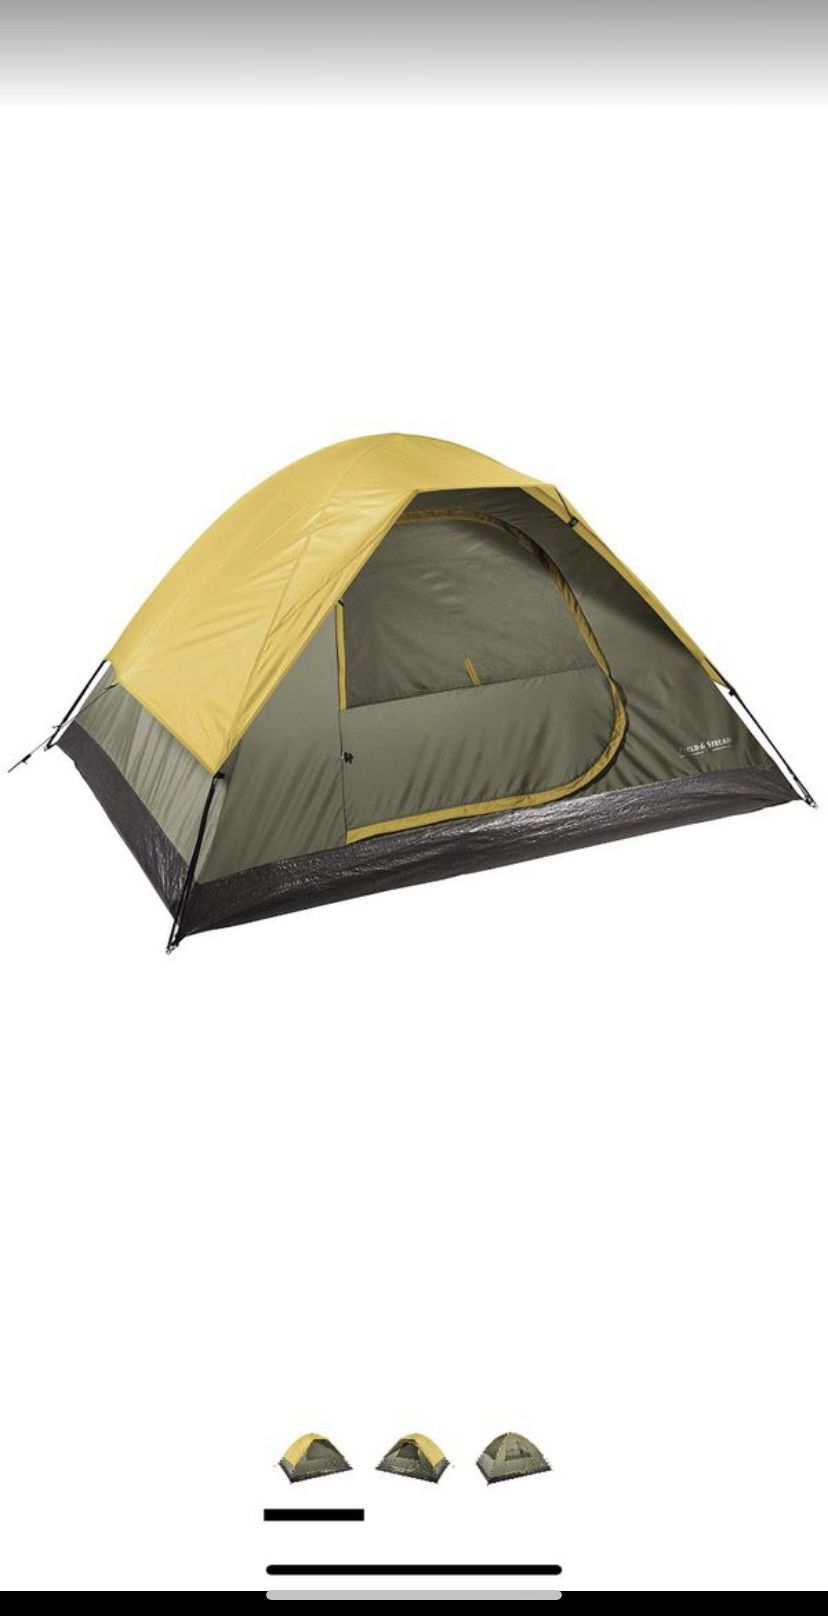 For camping